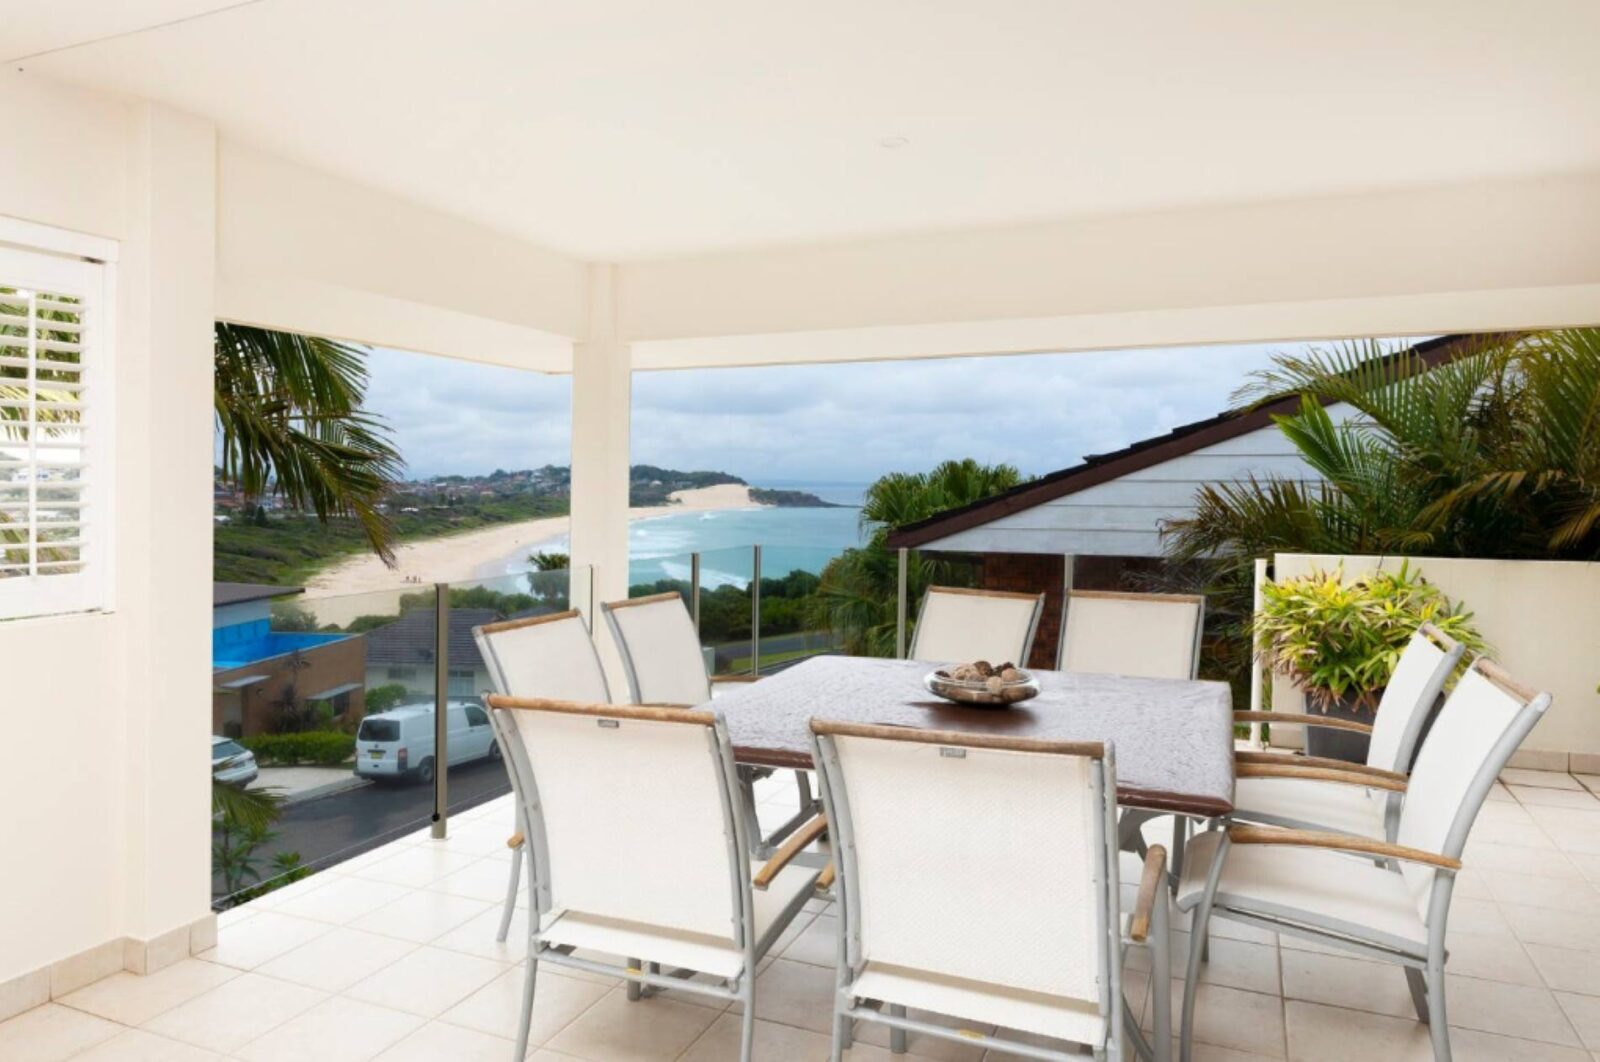 Outdoor dining with views over One Mile Beach